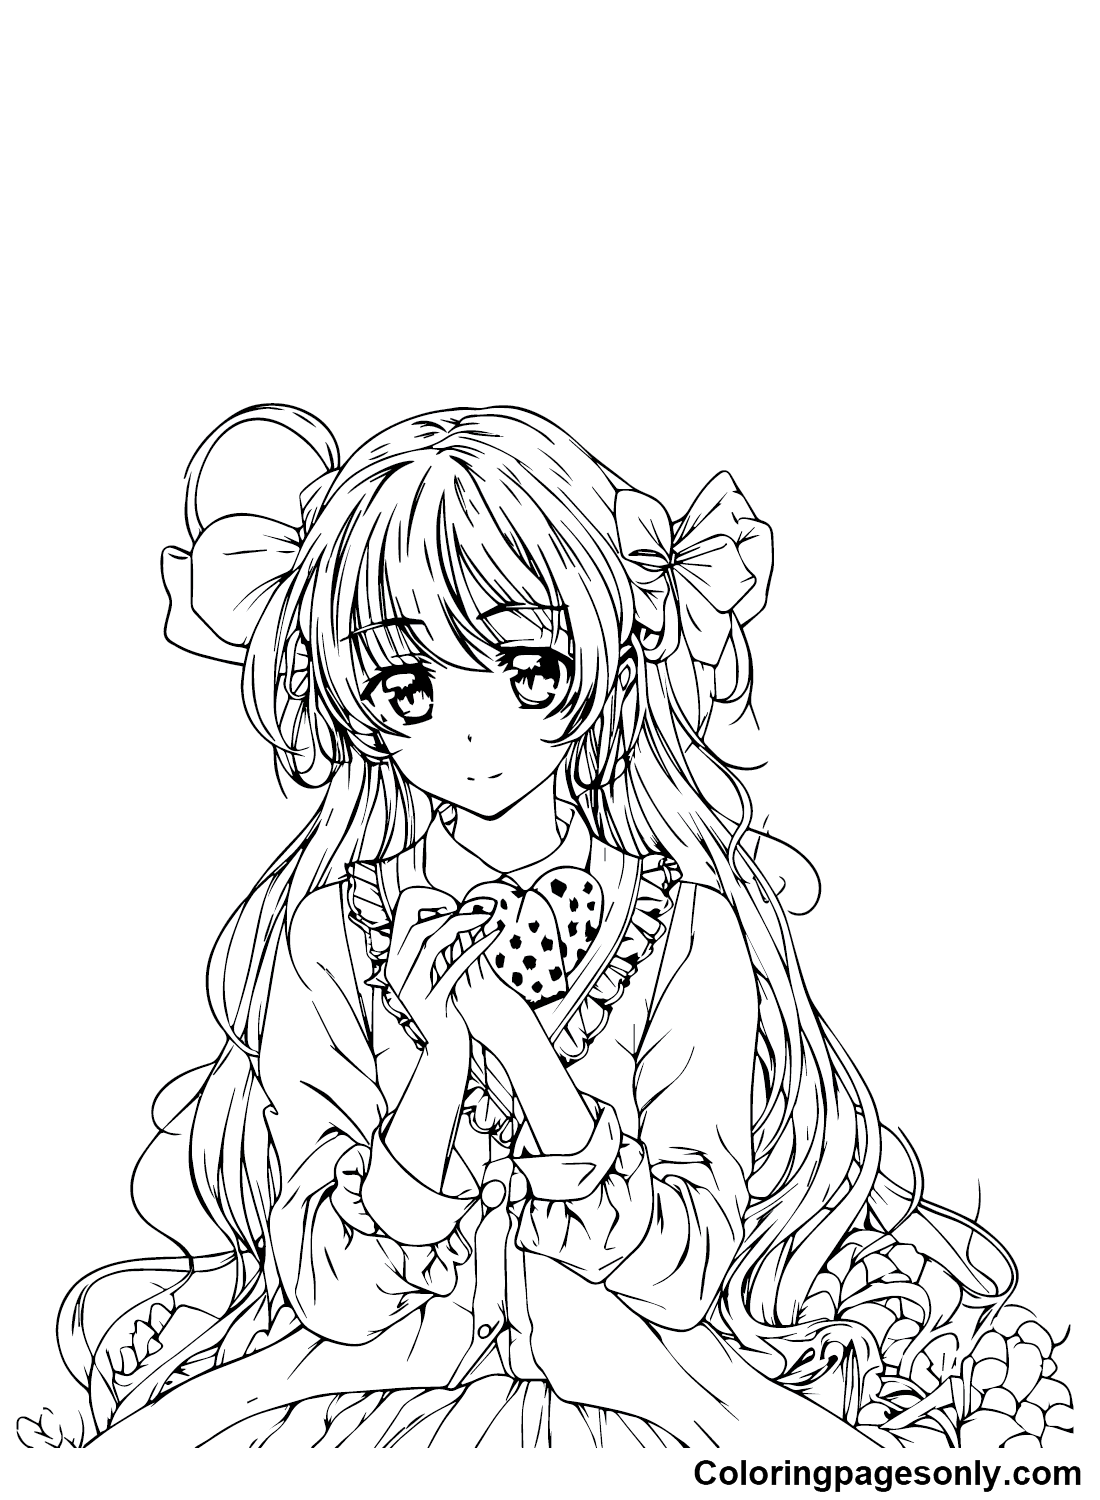 Intricate Cute Girl Anime Character Coloring Book Page · Creative Fabrica